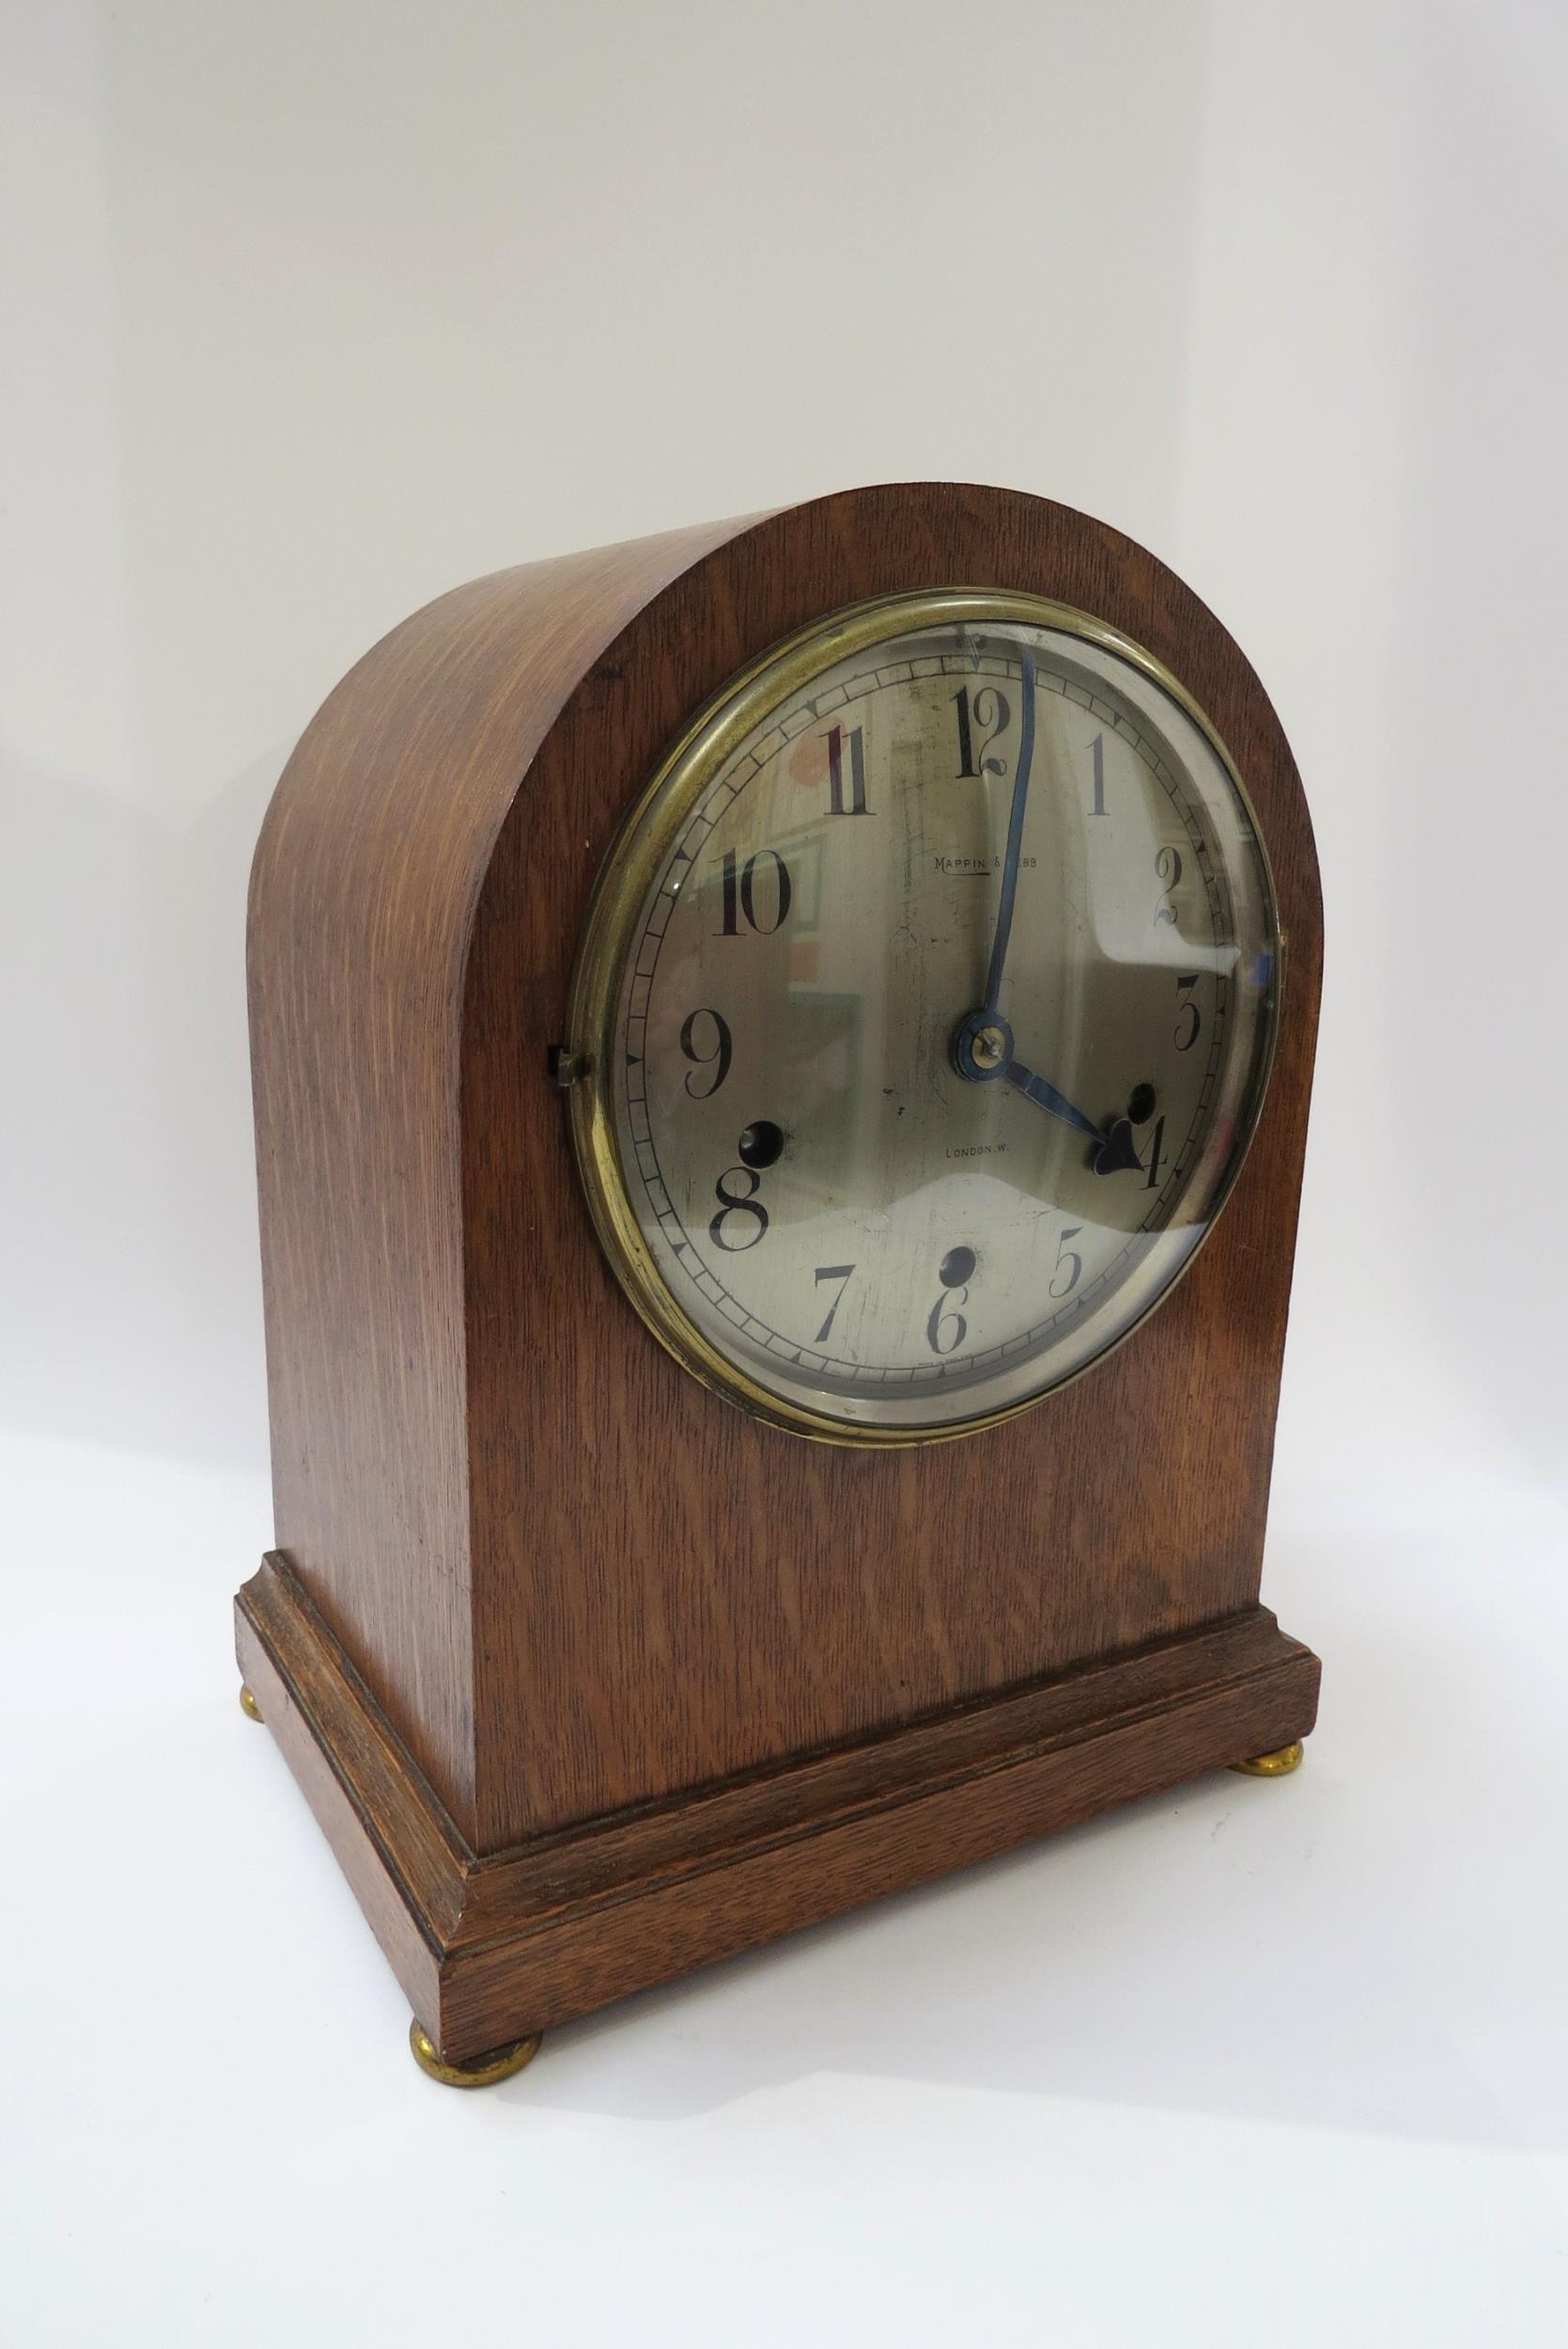 A Mappis & Webb London early 20th Century Westminster chime mantel clock striking on gong in light - Image 2 of 3